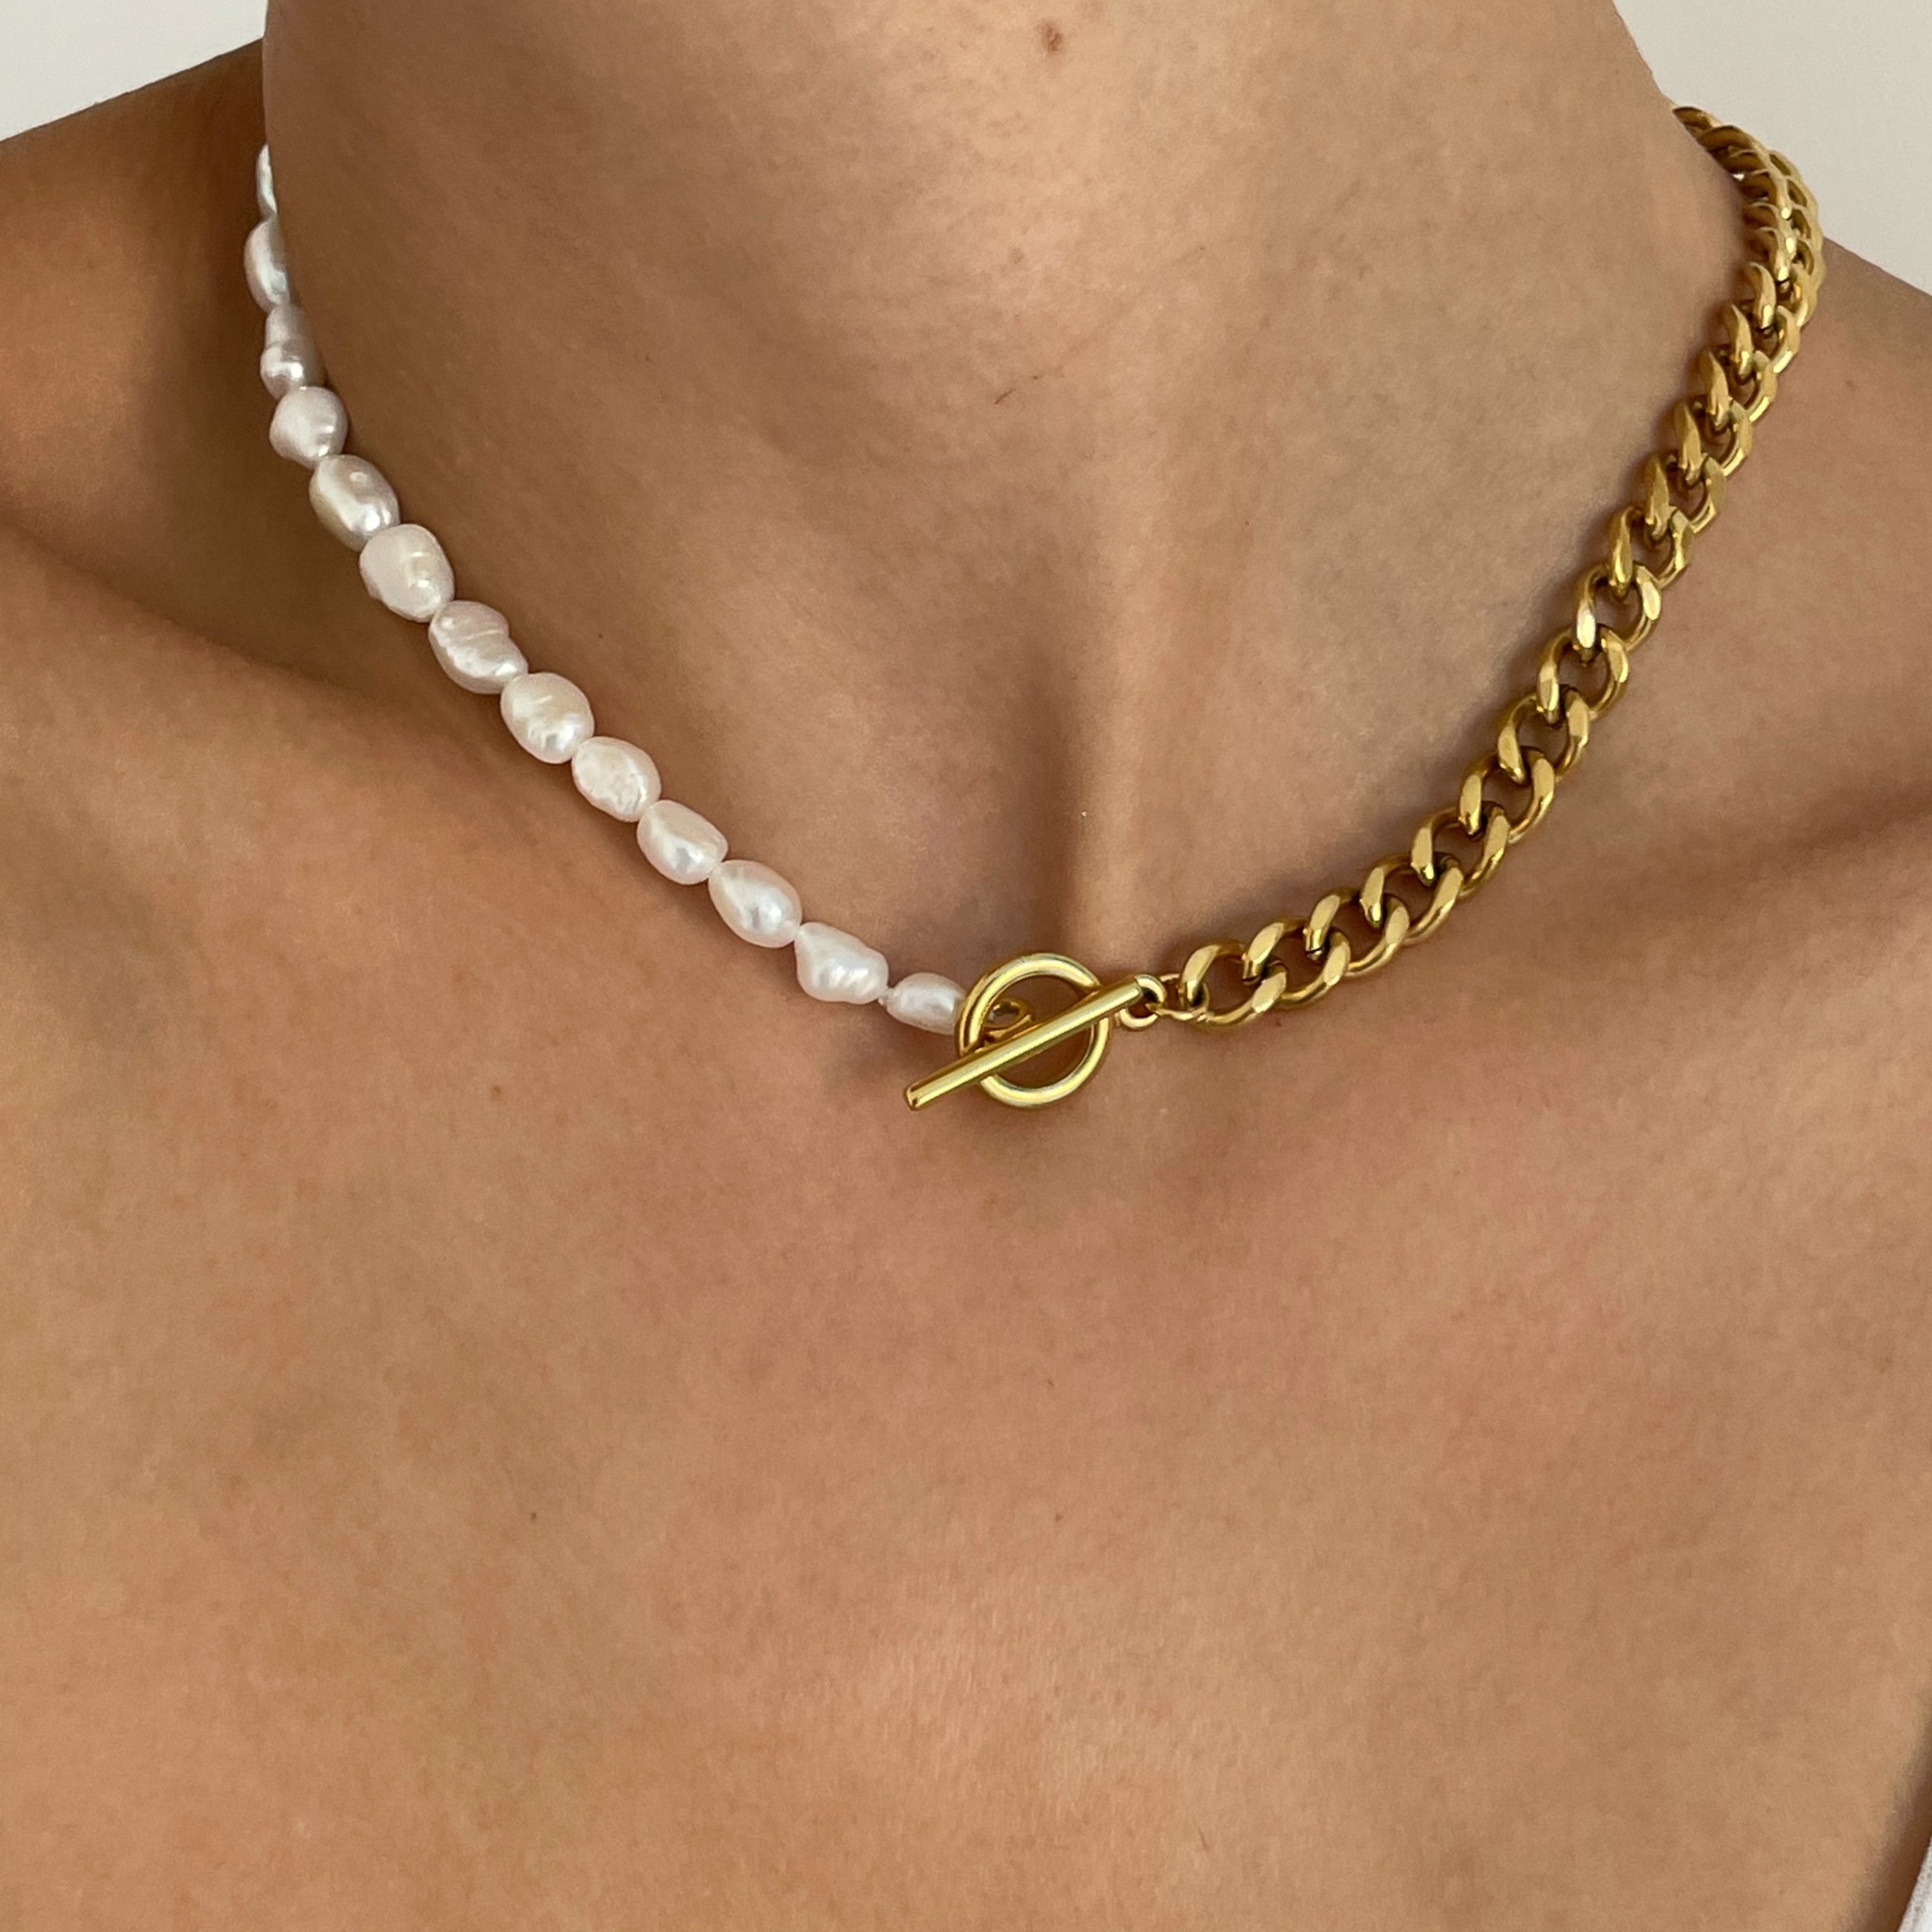 Statement Pearl Choker Necklace: Embrace sophistication with our gold pearl choker